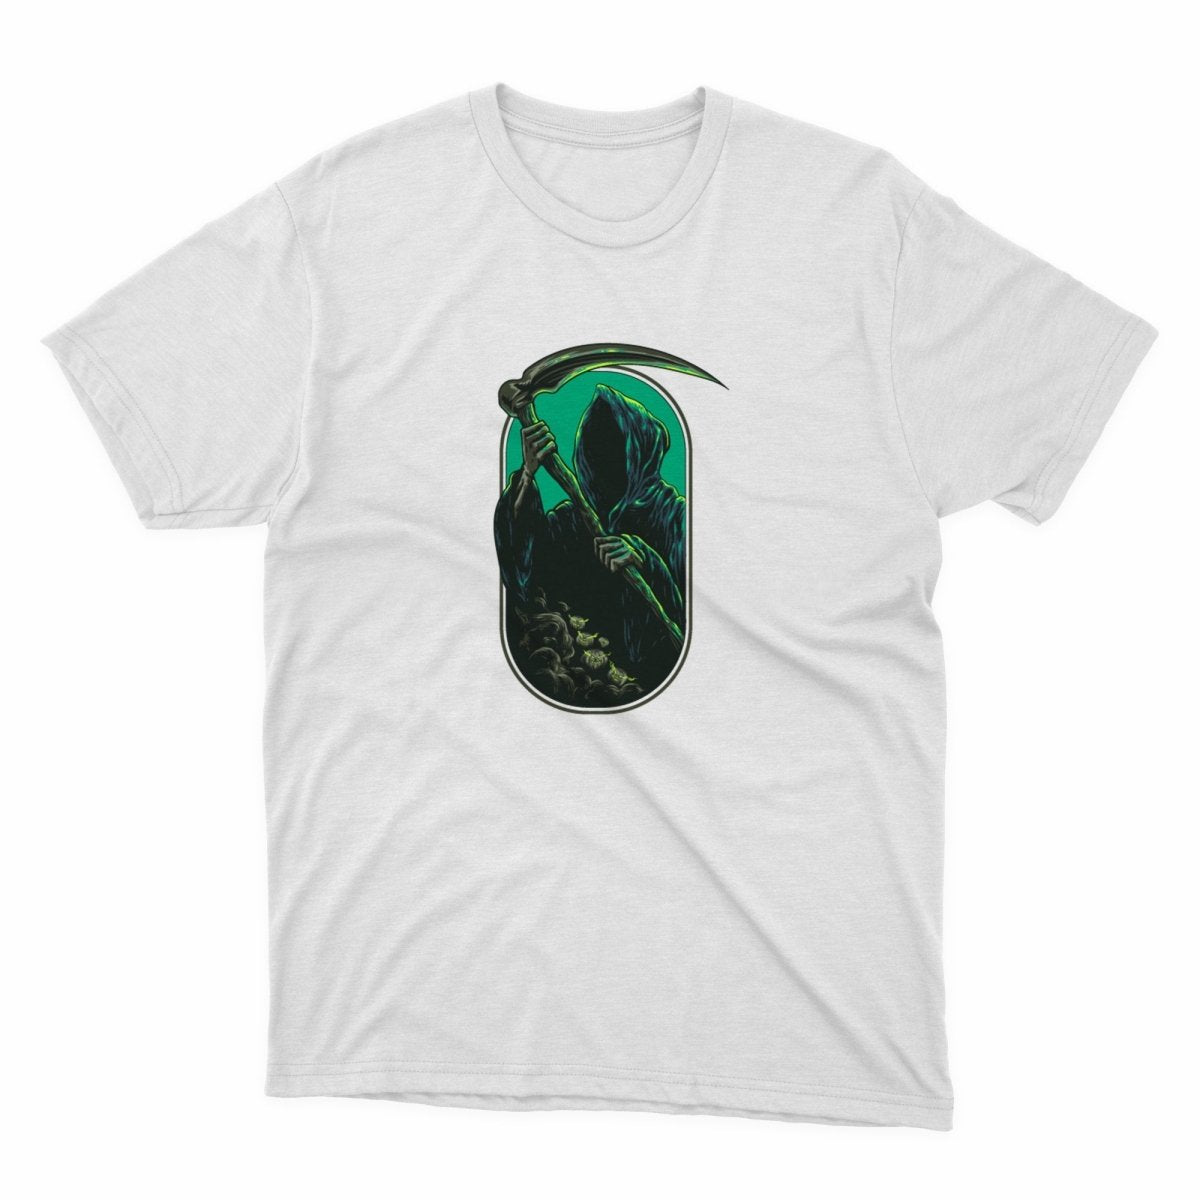 Cool Grim Reaper Teal Shirt - stickerbullCool Grim Reaper Teal ShirtShirtsPrintifystickerbull24823210201965547752WhiteSa white t - shirt with an image of a creature on it